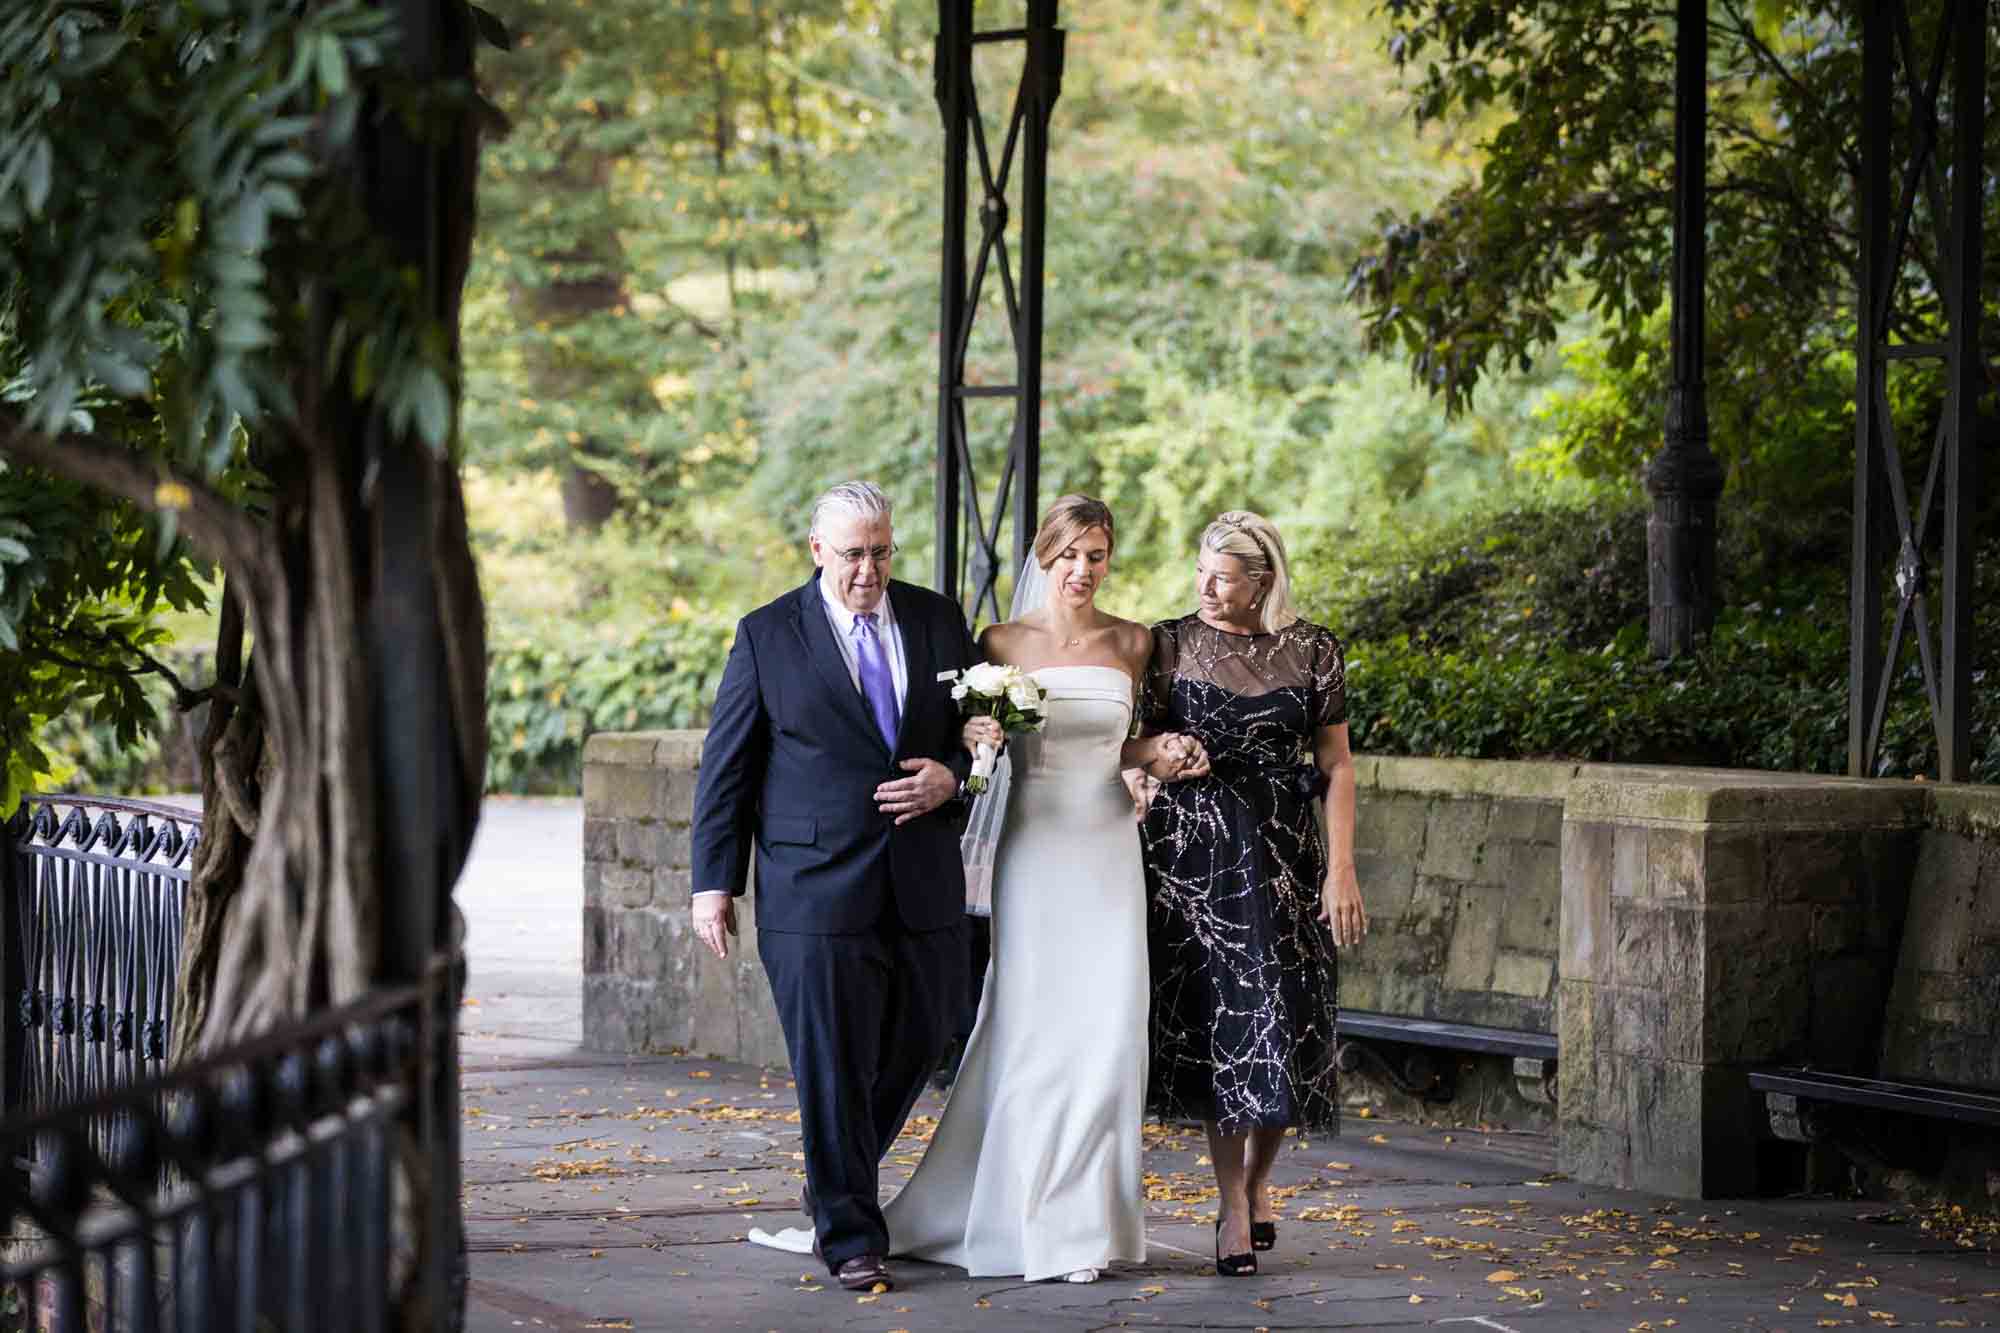 Bride and father walking up aisle on Wisteria Terrace during a Conservatory Garden wedding in Central Park